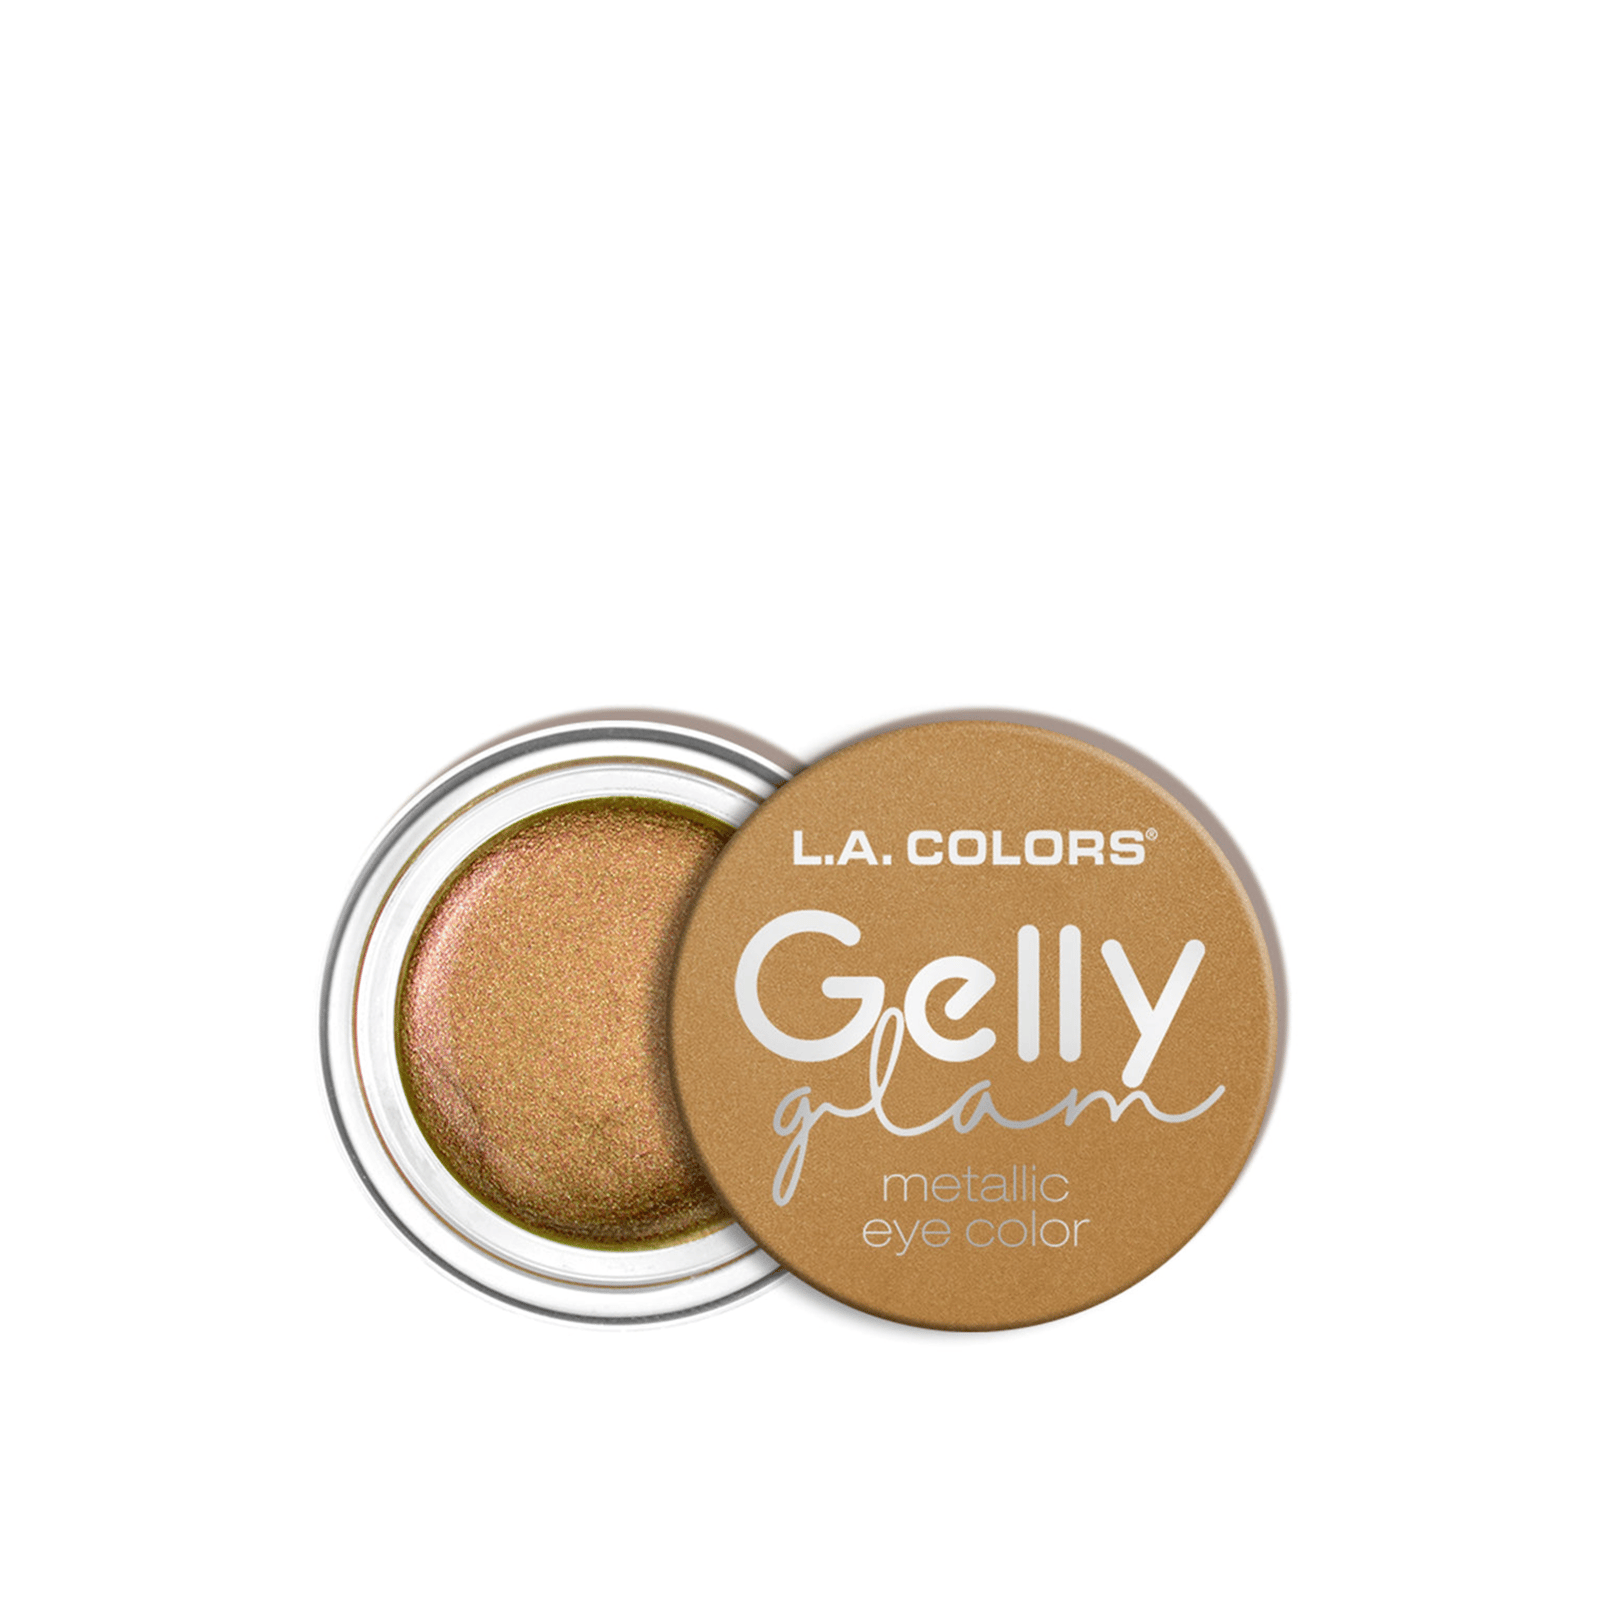 L.A Colors Gelly Glam Metallic Eye Color